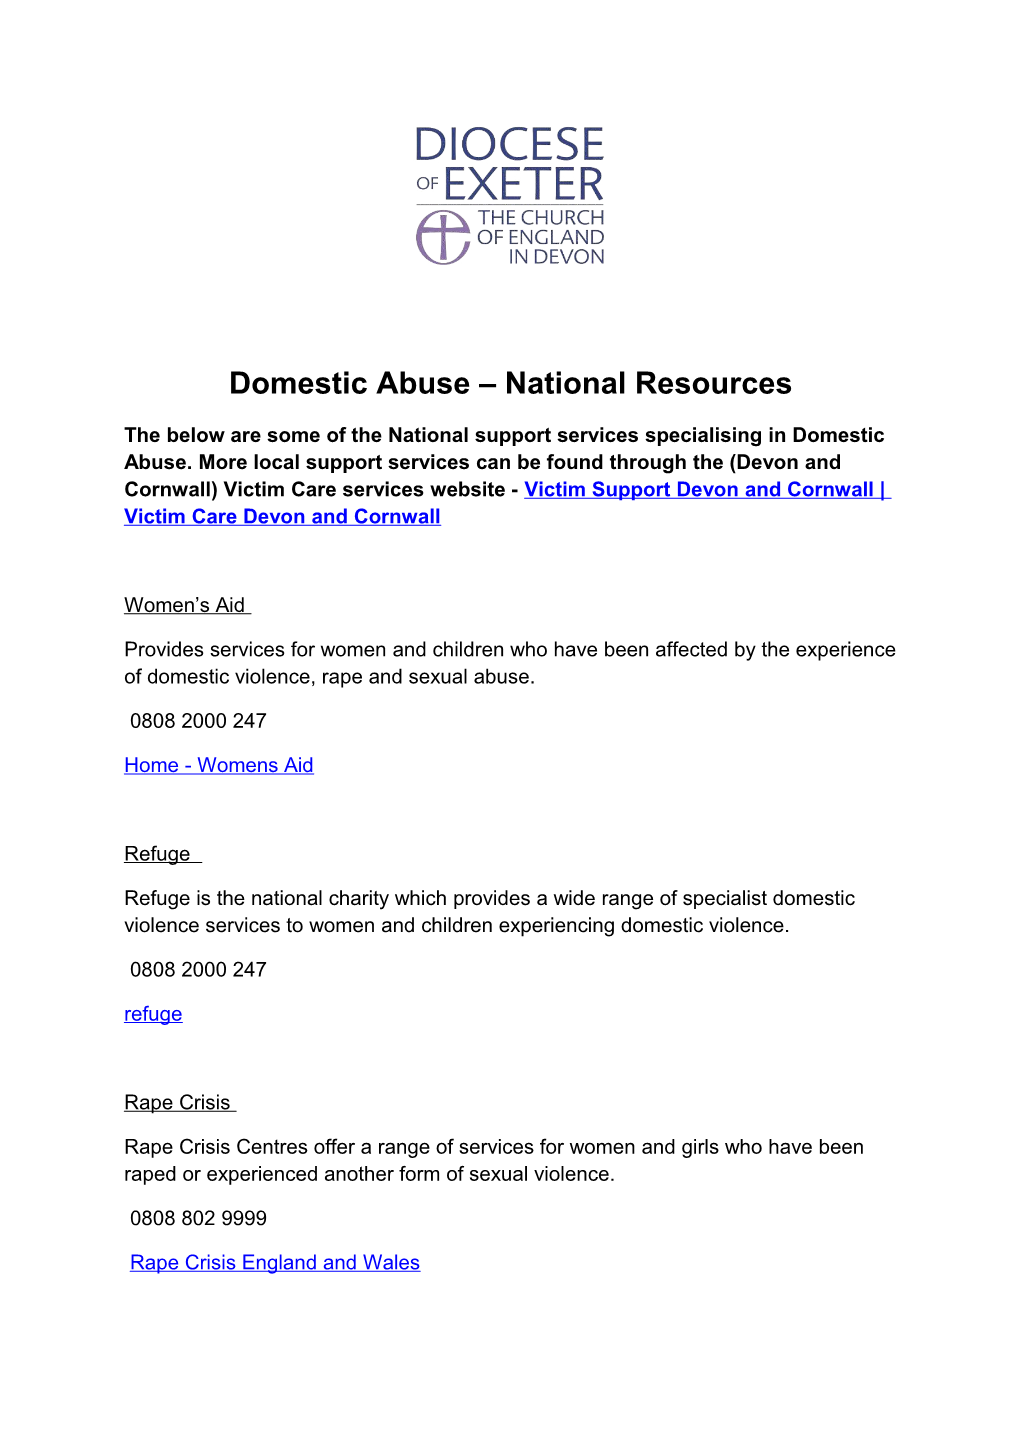 Domestic Abuse National Resources